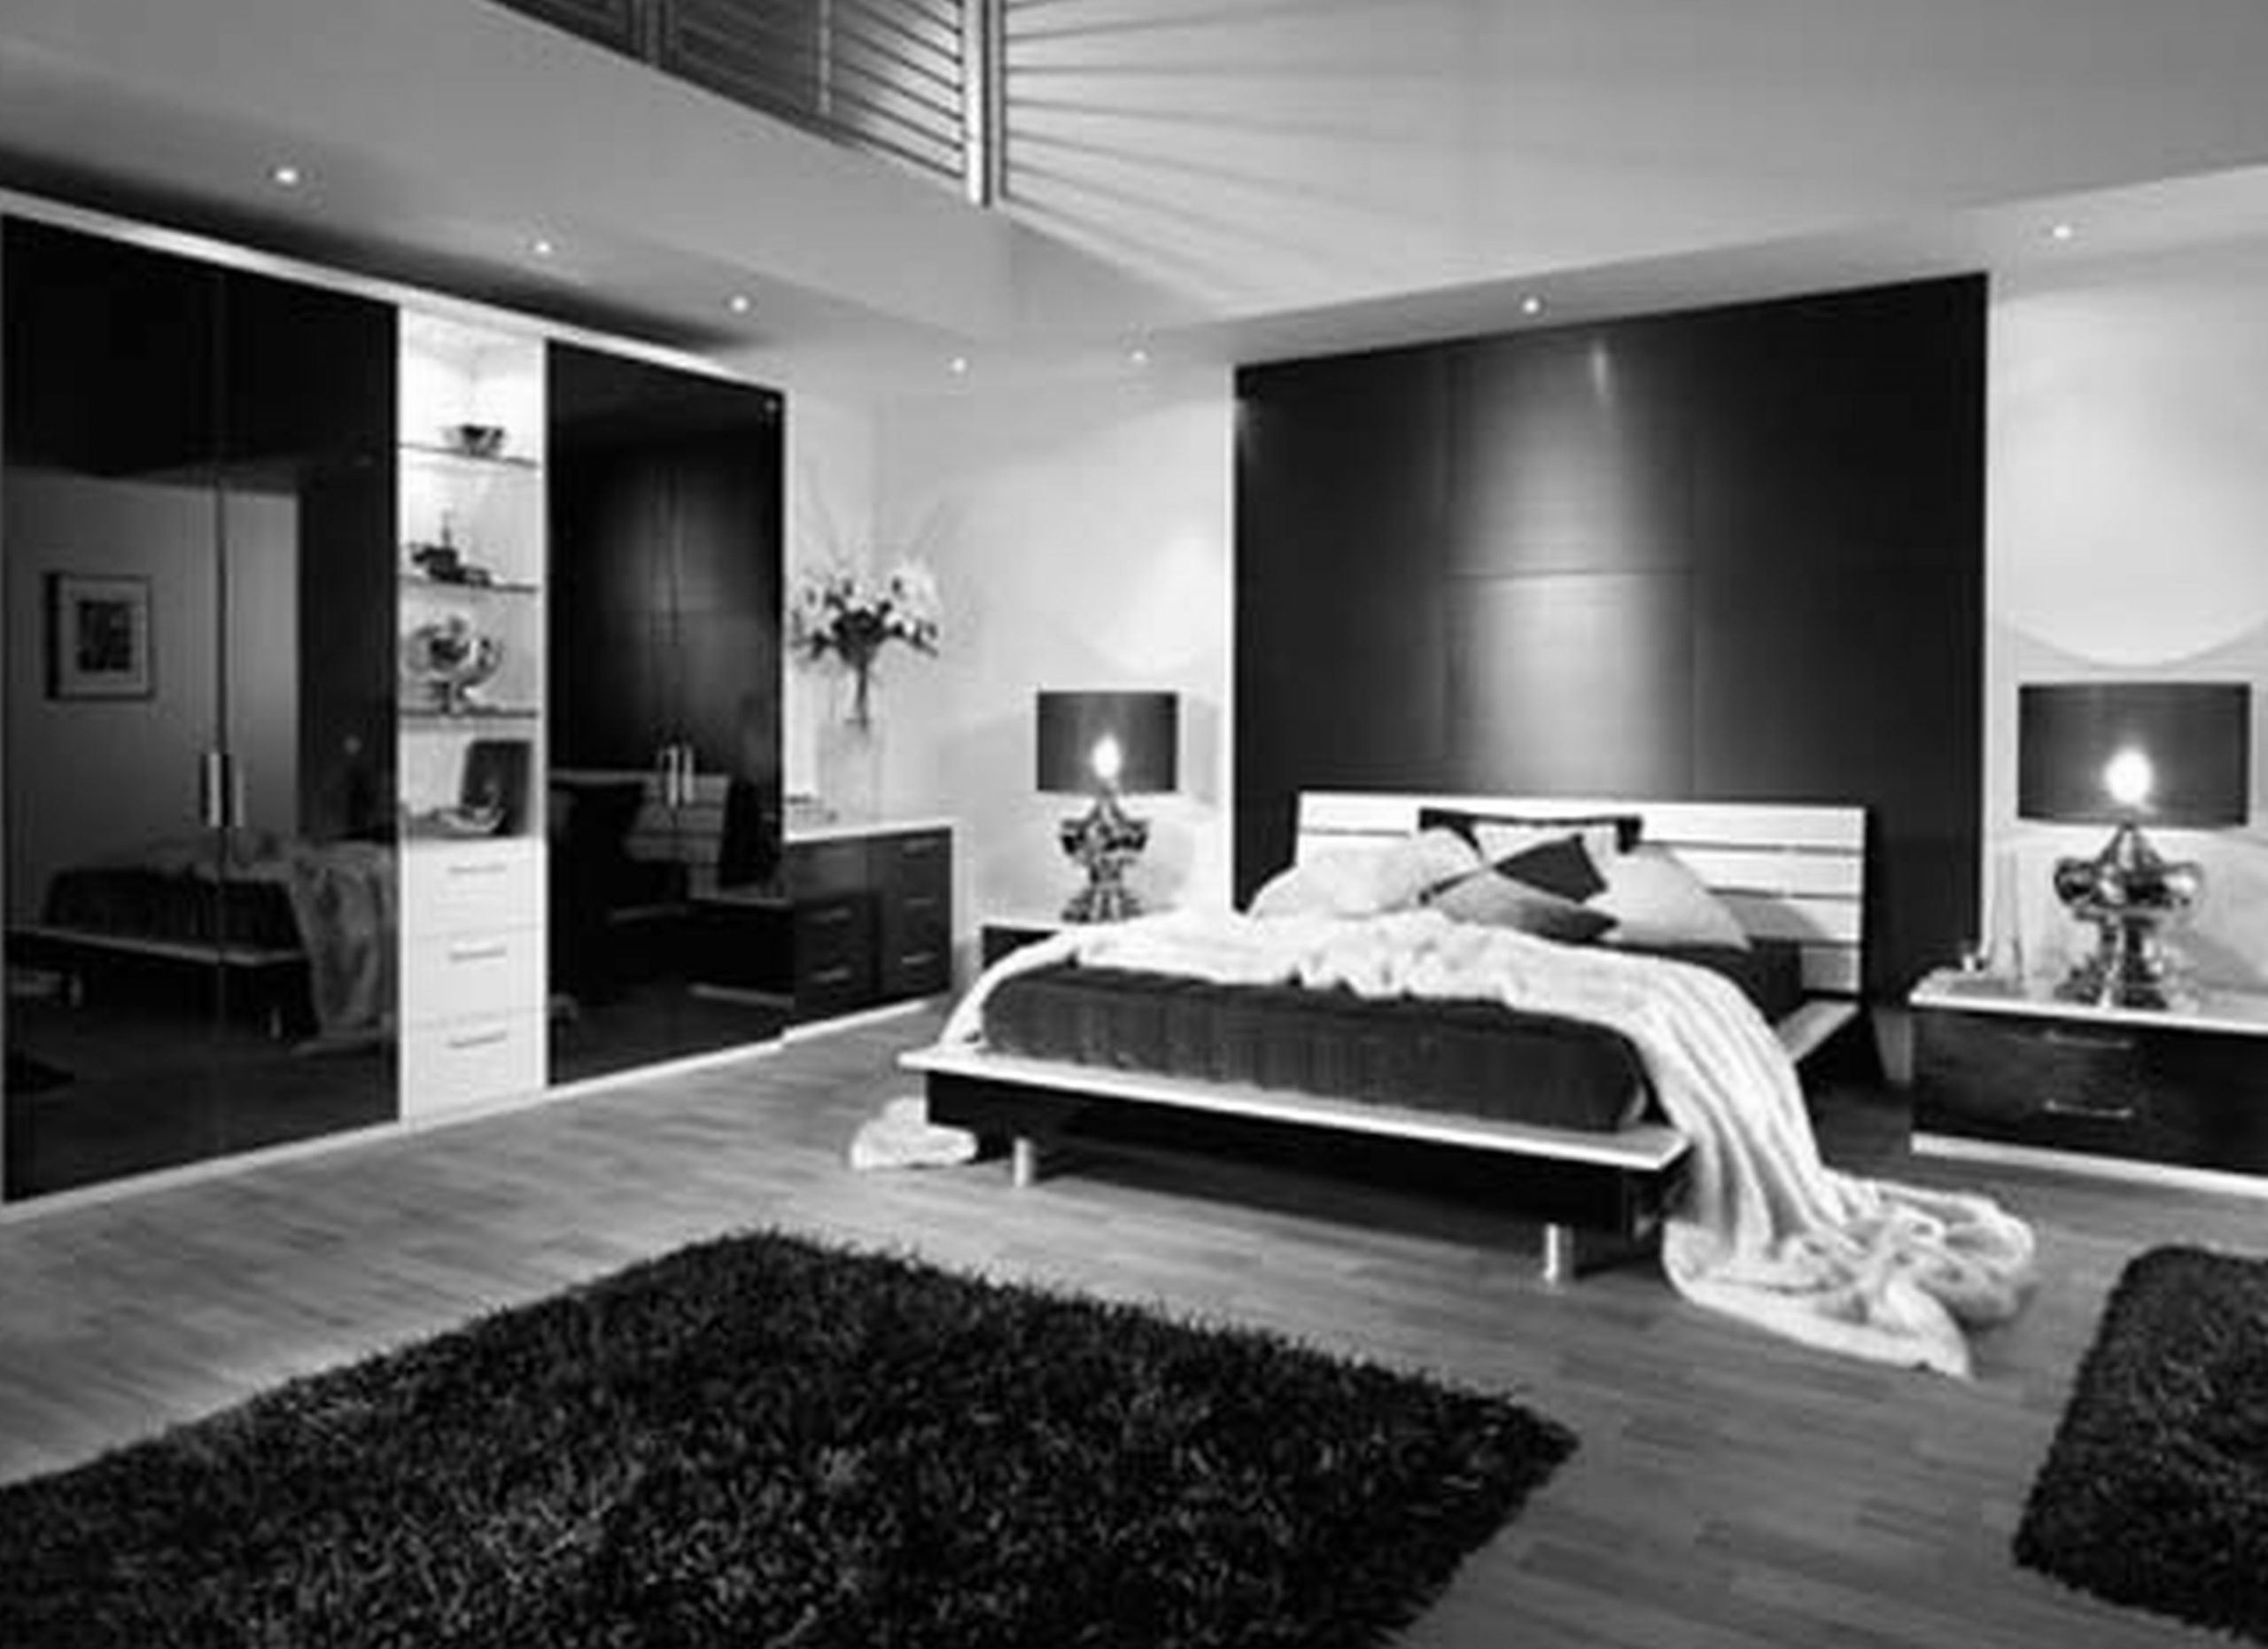 Modern Black And White Bedroom
 Absolutely Spectacular Modern Black And White Bedroom